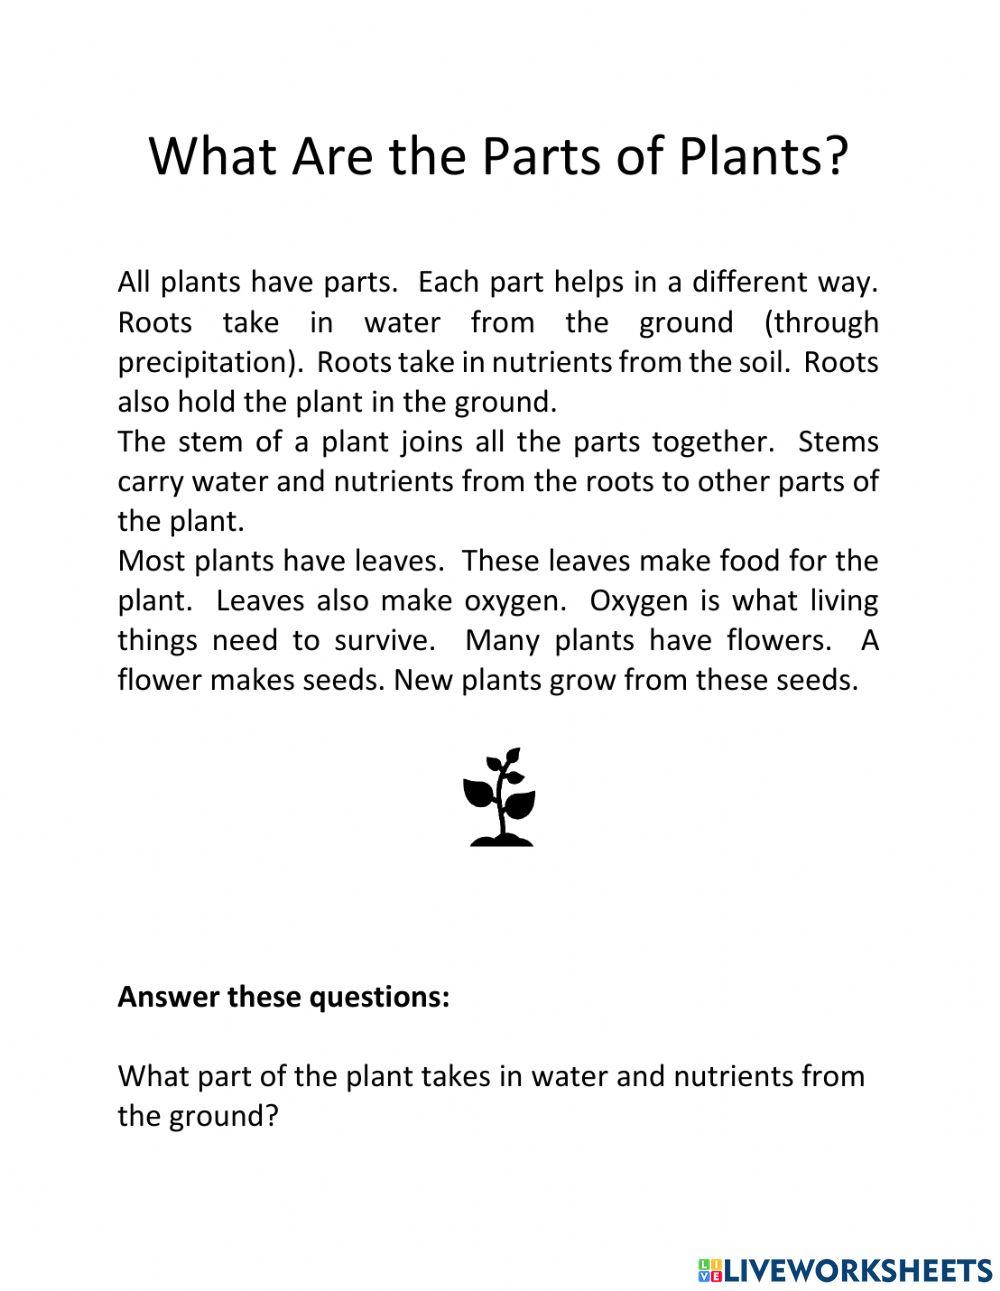 What Are the Parts of a Plant?